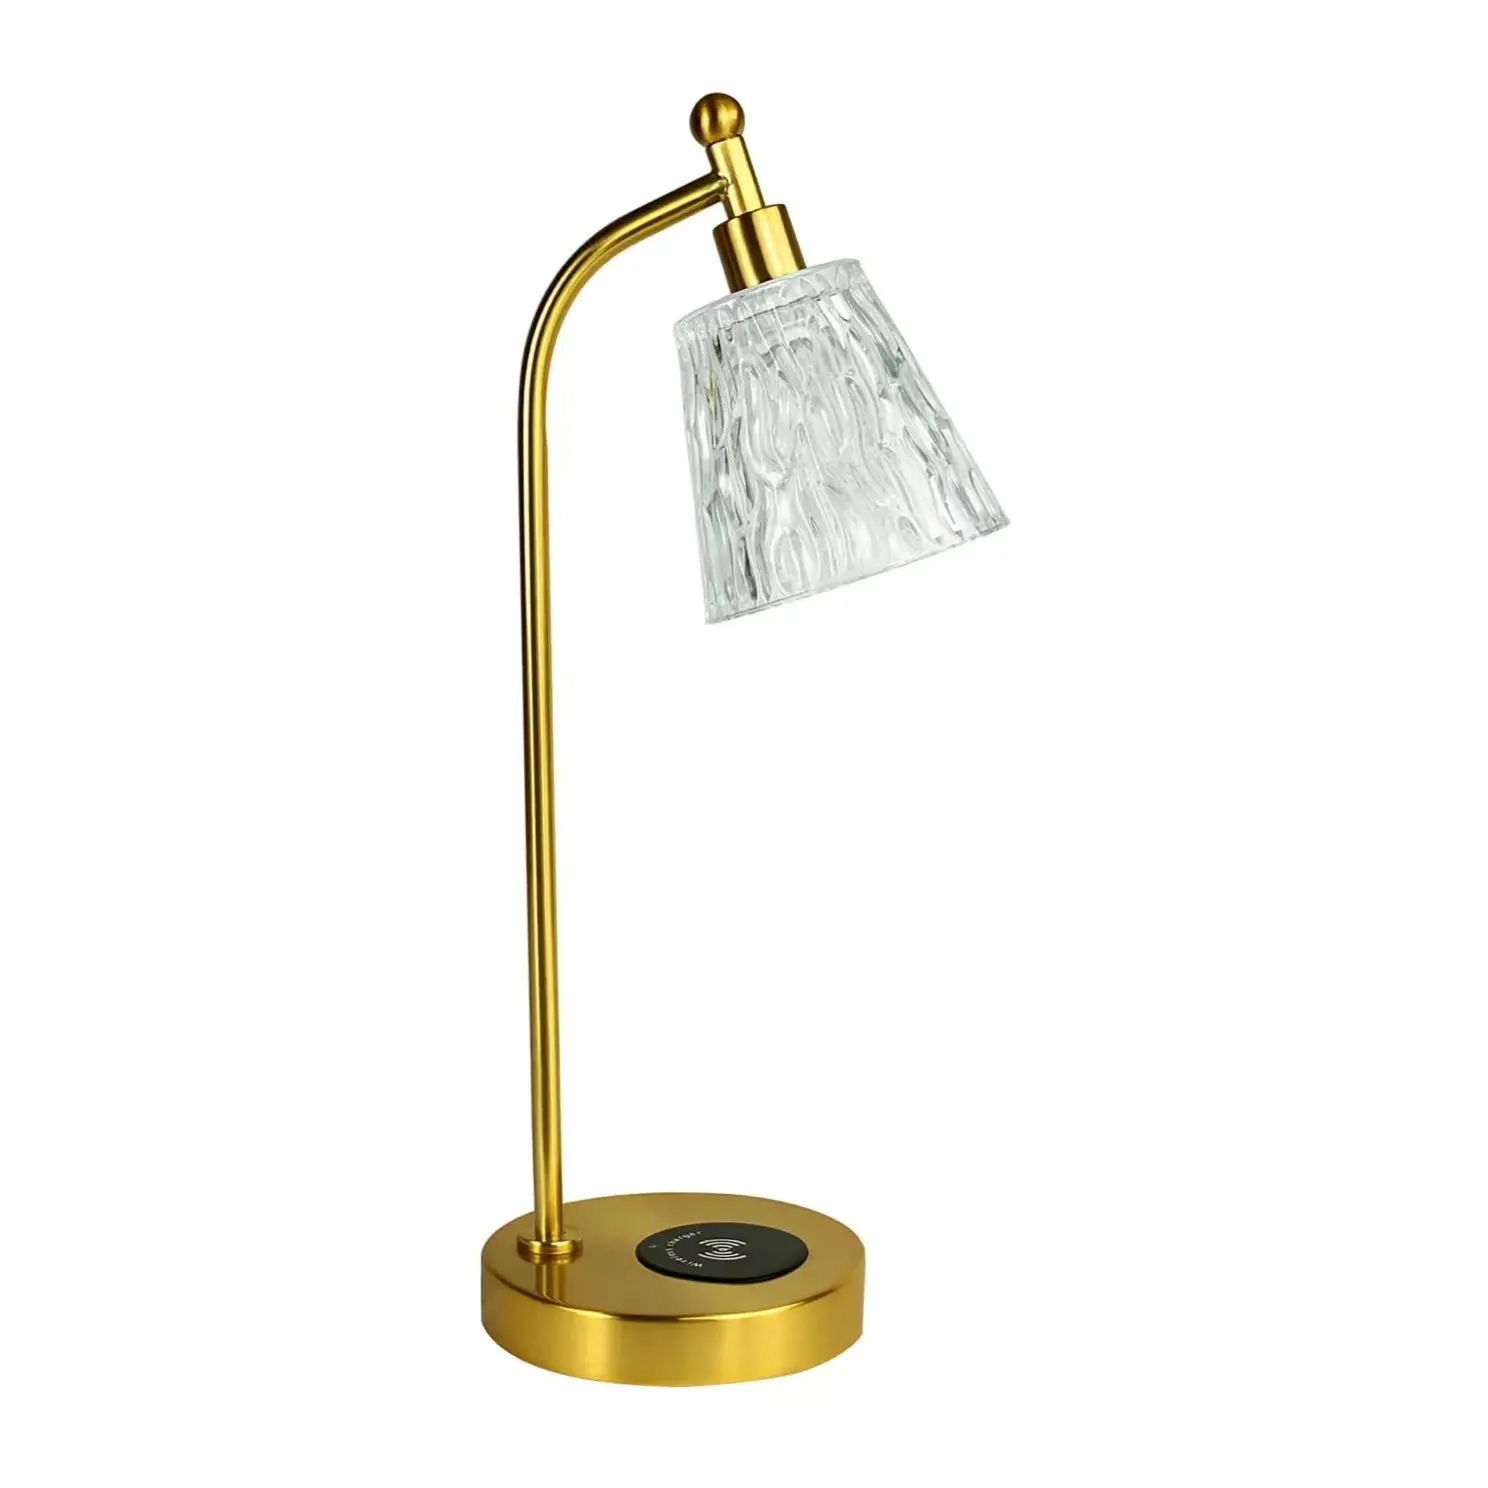 Vintage Bedside Lamp With Glass Shade Touch Control Dimmable Table Lamp With Wireless Charging